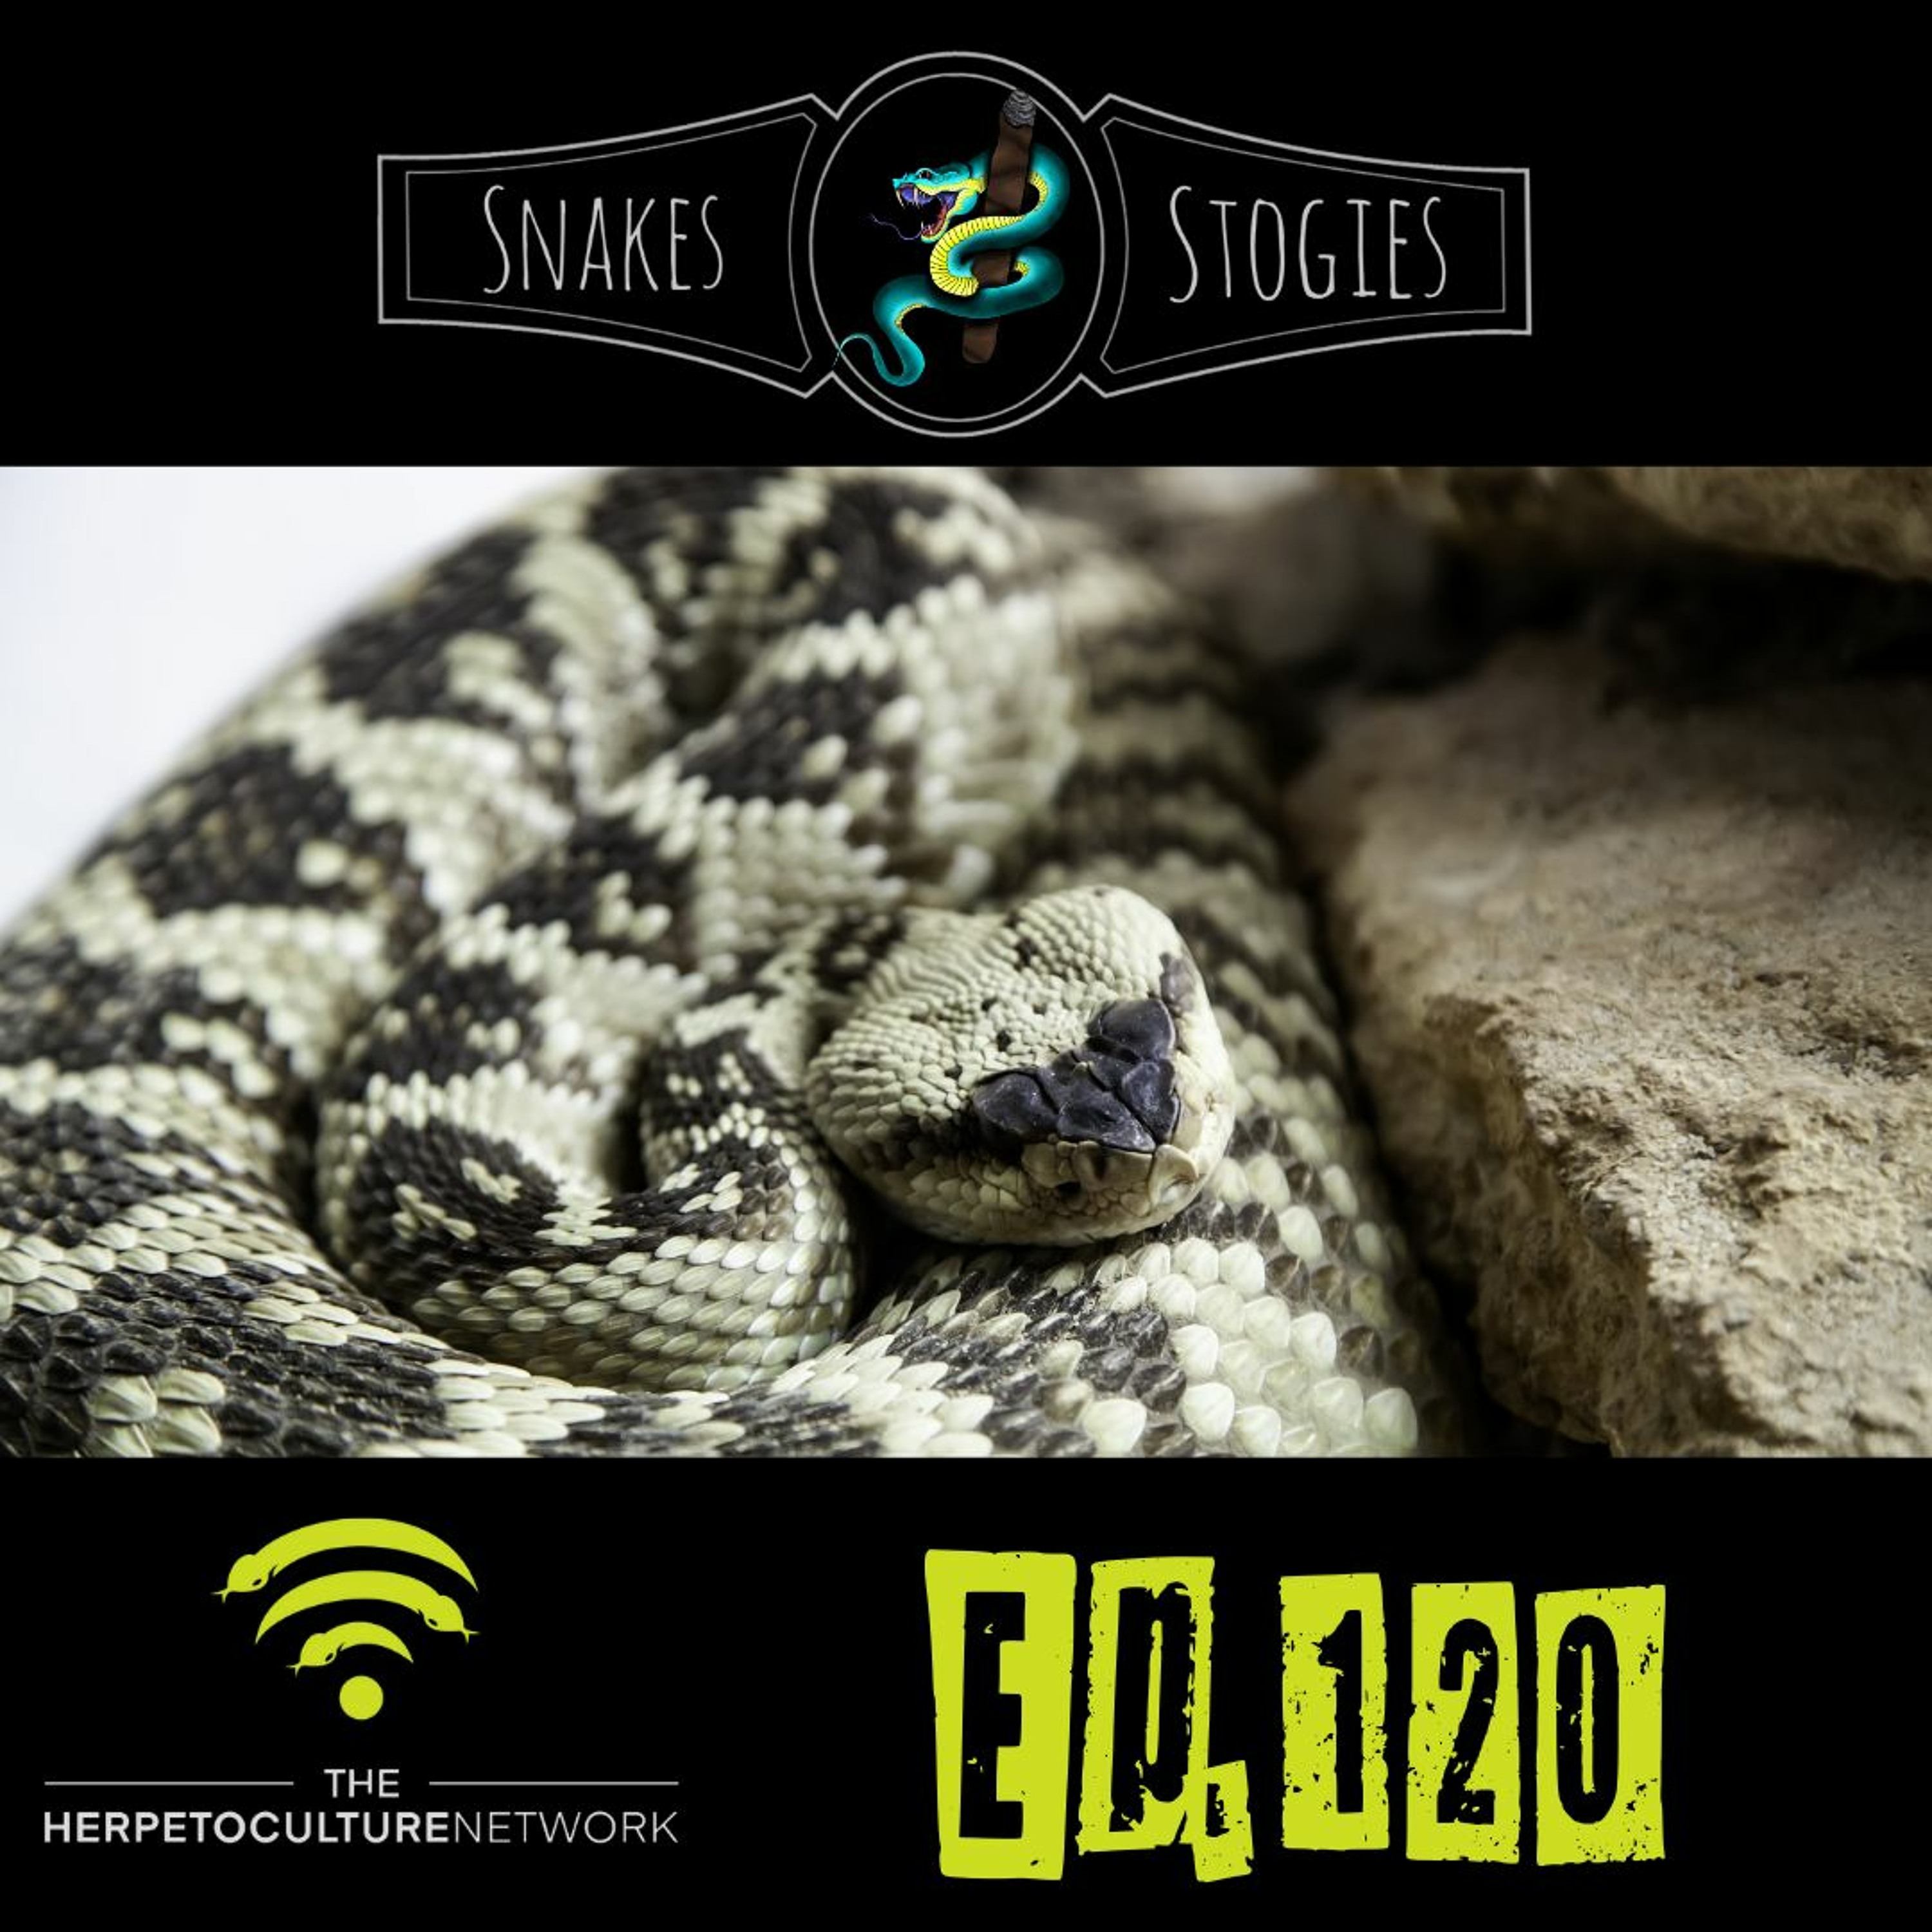 Snakes & Stogies Ep. 120 - Crotalids with Derek Dykstra